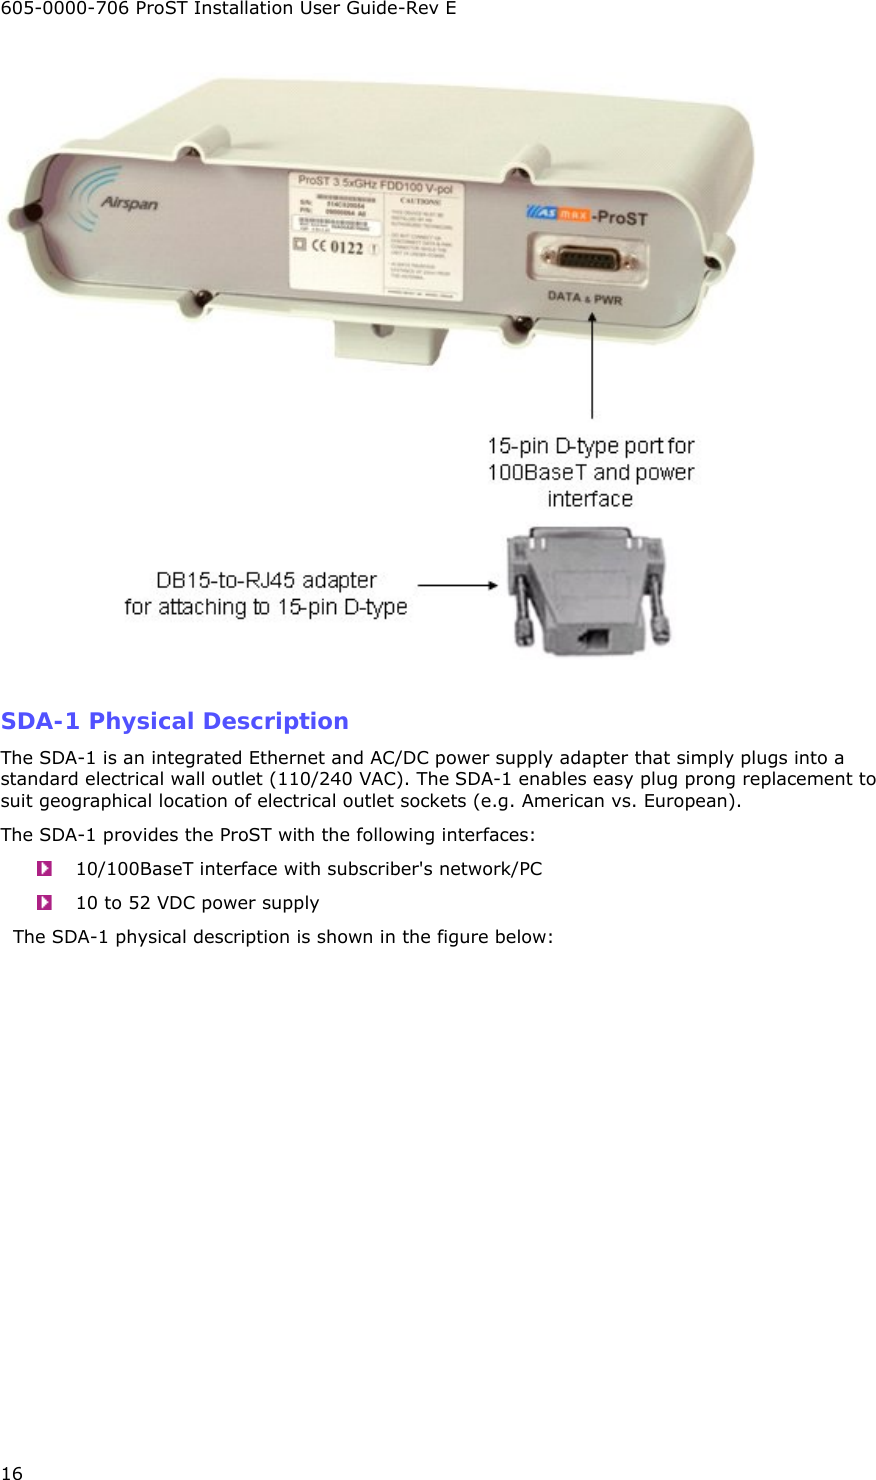 605-0000-706 ProST Installation User Guide-Rev E 16   SDA-1 Physical Description The SDA-1 is an integrated Ethernet and AC/DC power supply adapter that simply plugs into a standard electrical wall outlet (110/240 VAC). The SDA-1 enables easy plug prong replacement to suit geographical location of electrical outlet sockets (e.g. American vs. European). The SDA-1 provides the ProST with the following interfaces:   10/100BaseT interface with subscriber&apos;s network/PC   10 to 52 VDC power supply   The SDA-1 physical description is shown in the figure below: 